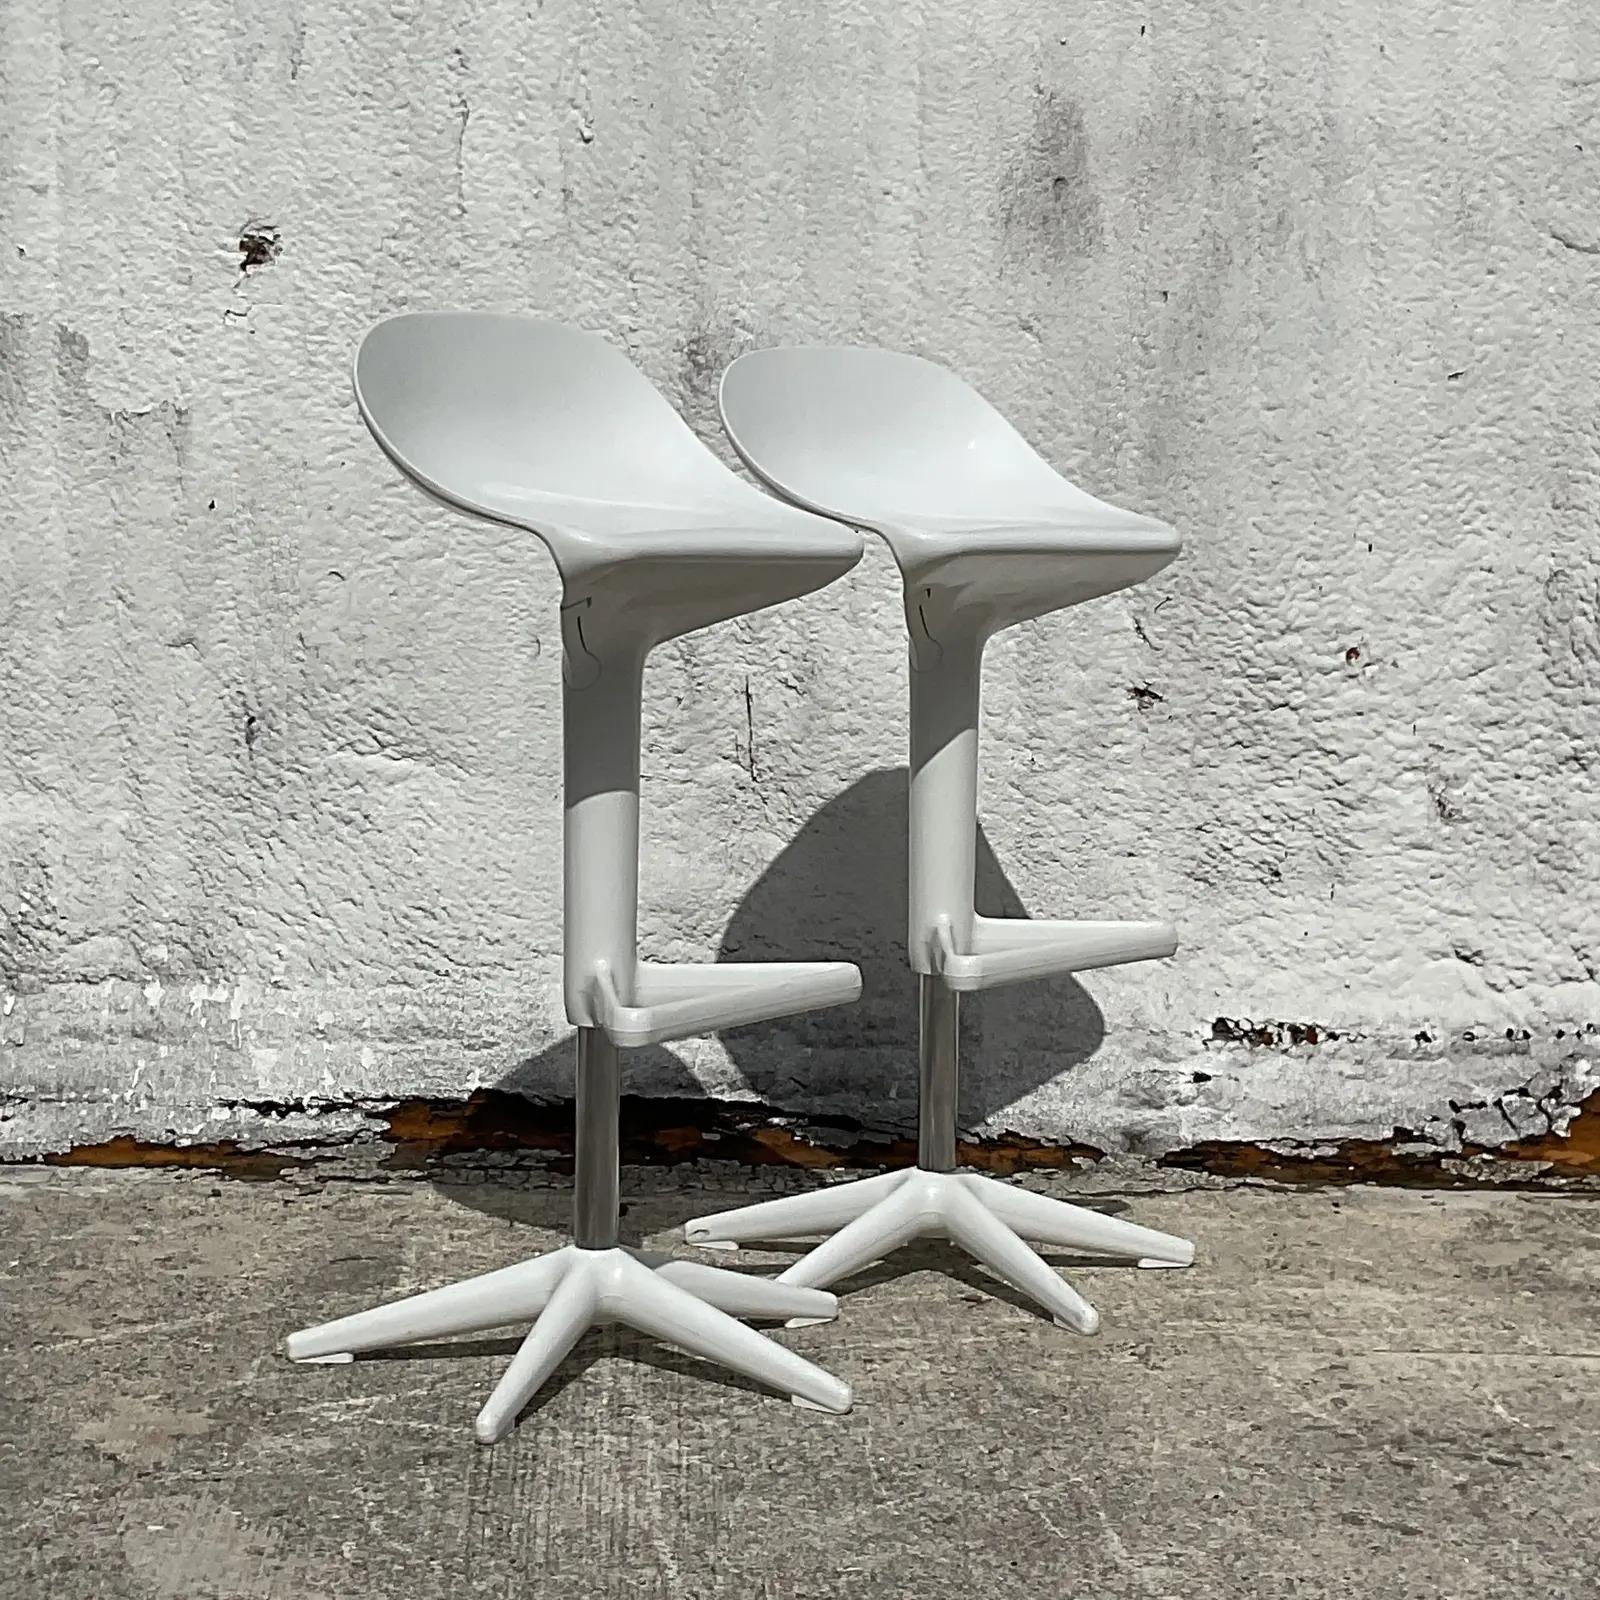 Fantastic pair of vintage Contemporary bar stools. Adjustable seat height from 22 to 30. Beautiful floors white with chrome hardware. Marked on the bottom. Acquired from a Palm Beach estate.

Measures: Seat height - 22 to 30
Height - 30 to 38.